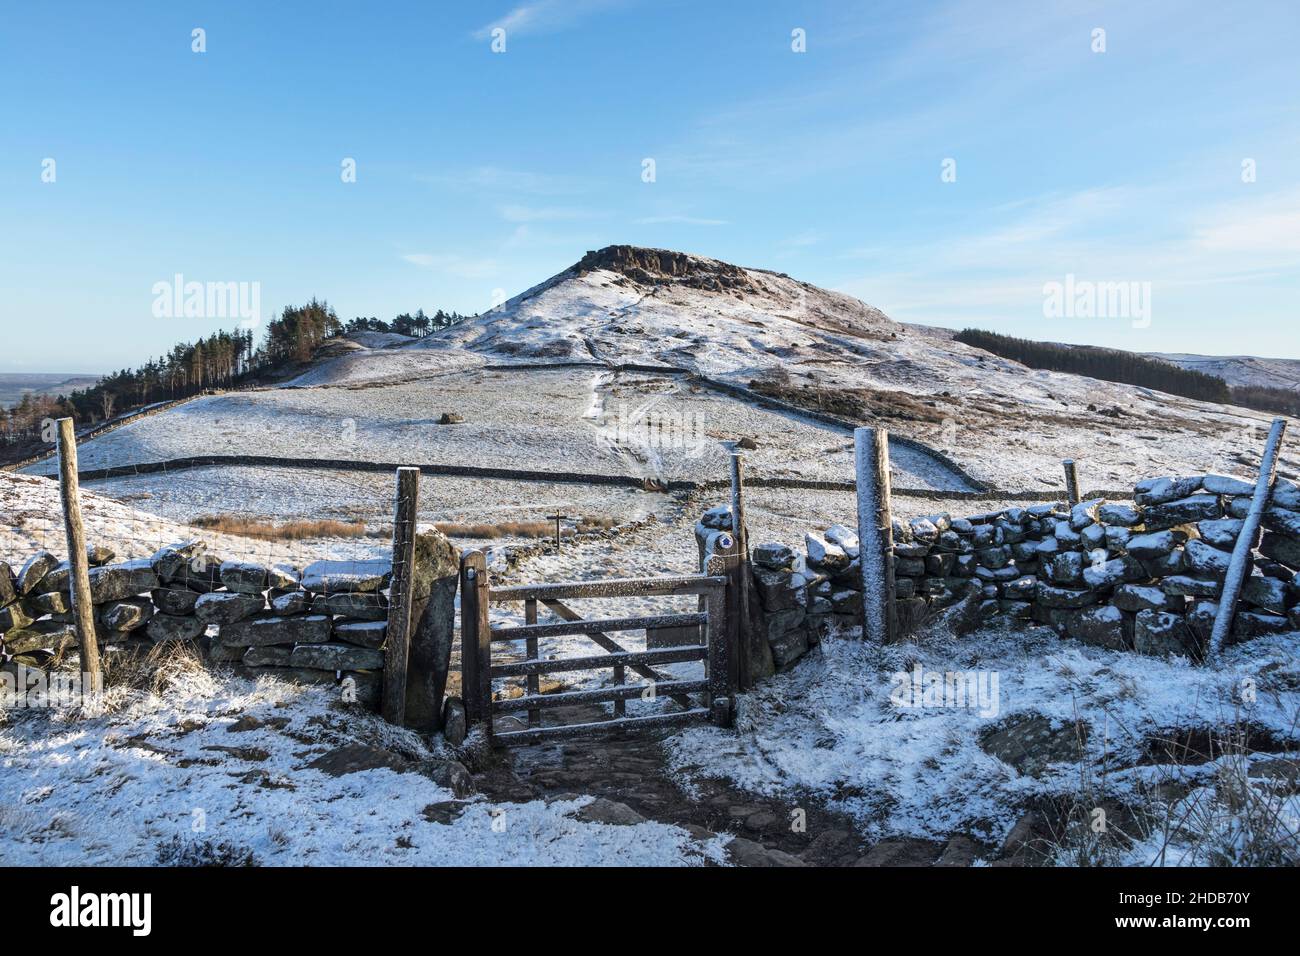 The Wainstones in Winter, Cleveland Way, North Yorkshire Moors National Park, Regno Unito Foto Stock